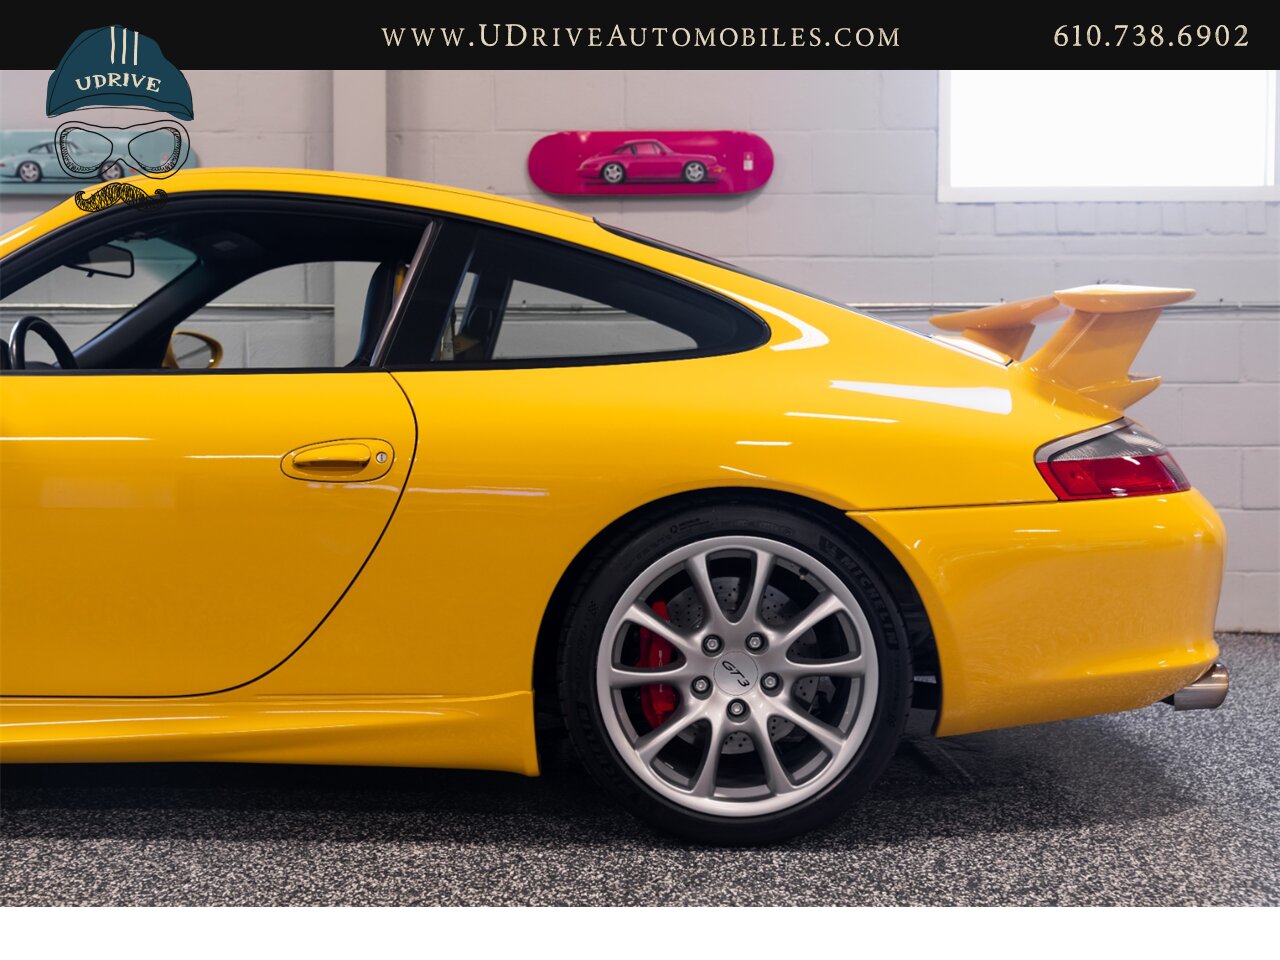 2005 Porsche 911 GT3 996 Speed Yellow Sport Seats Pntd Hardbacks  Pntd Console Deviating Stitch Yellow Accents Throughout - Photo 27 - West Chester, PA 19382